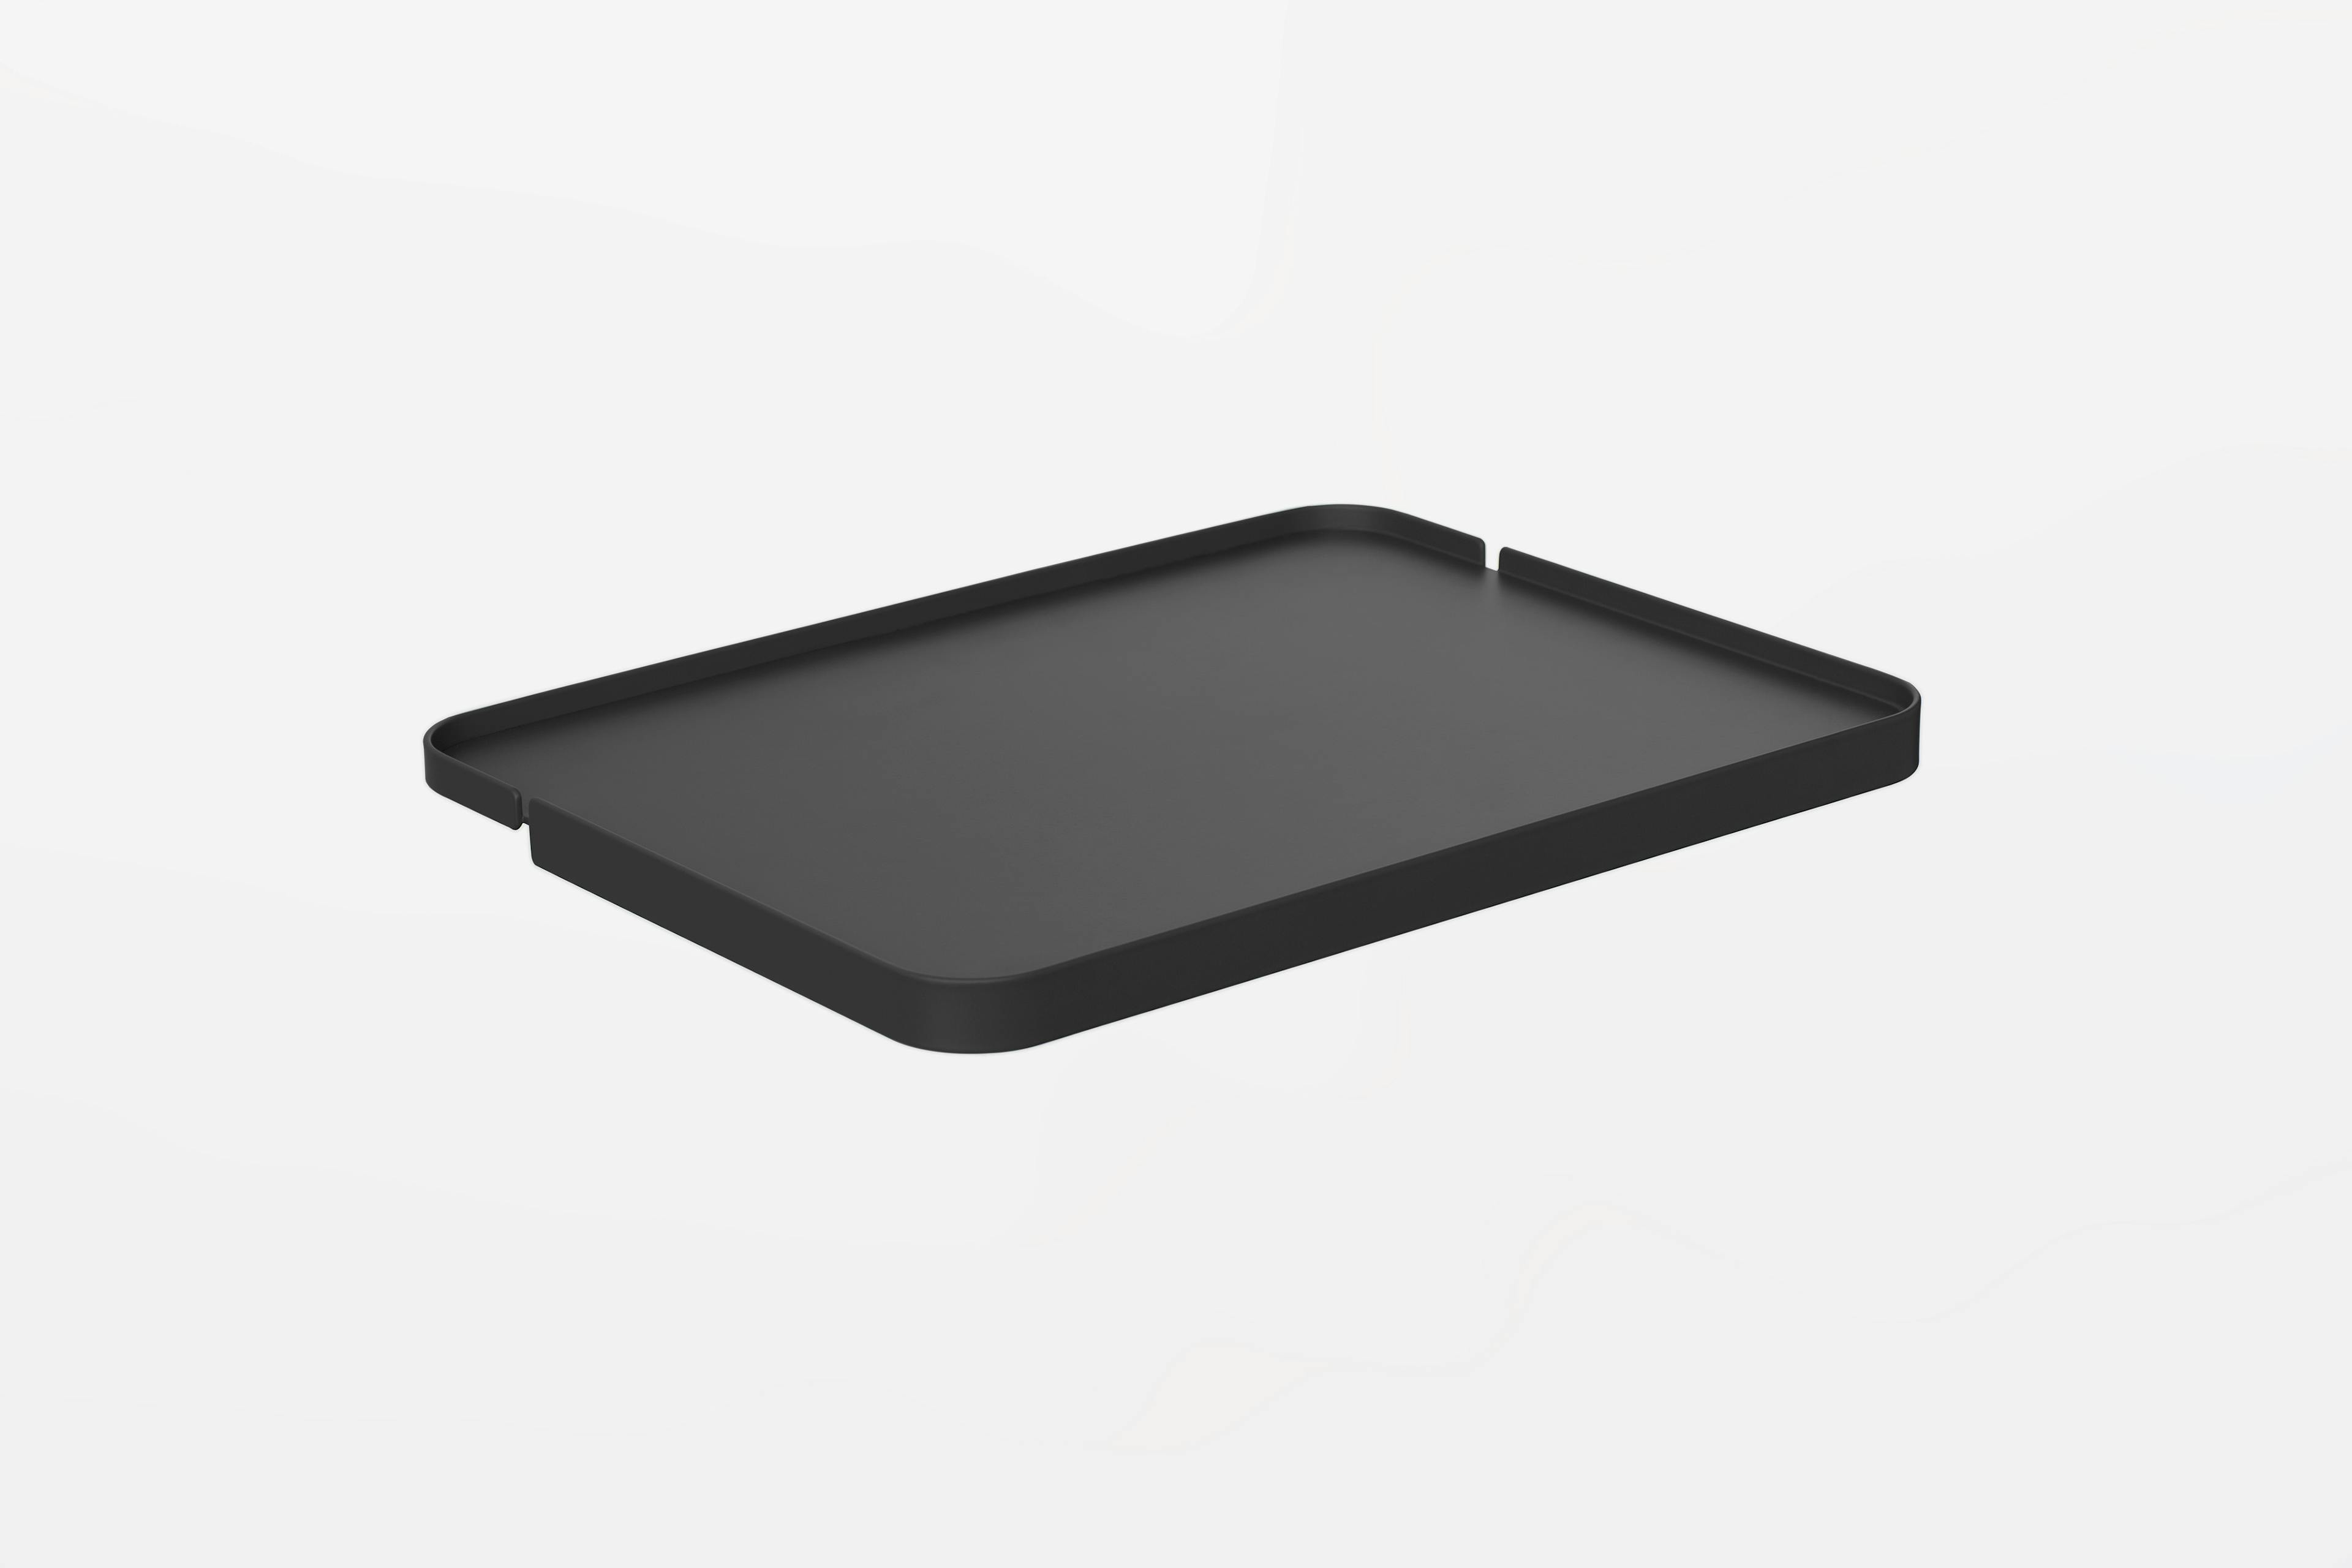 The Tray in Matte Black